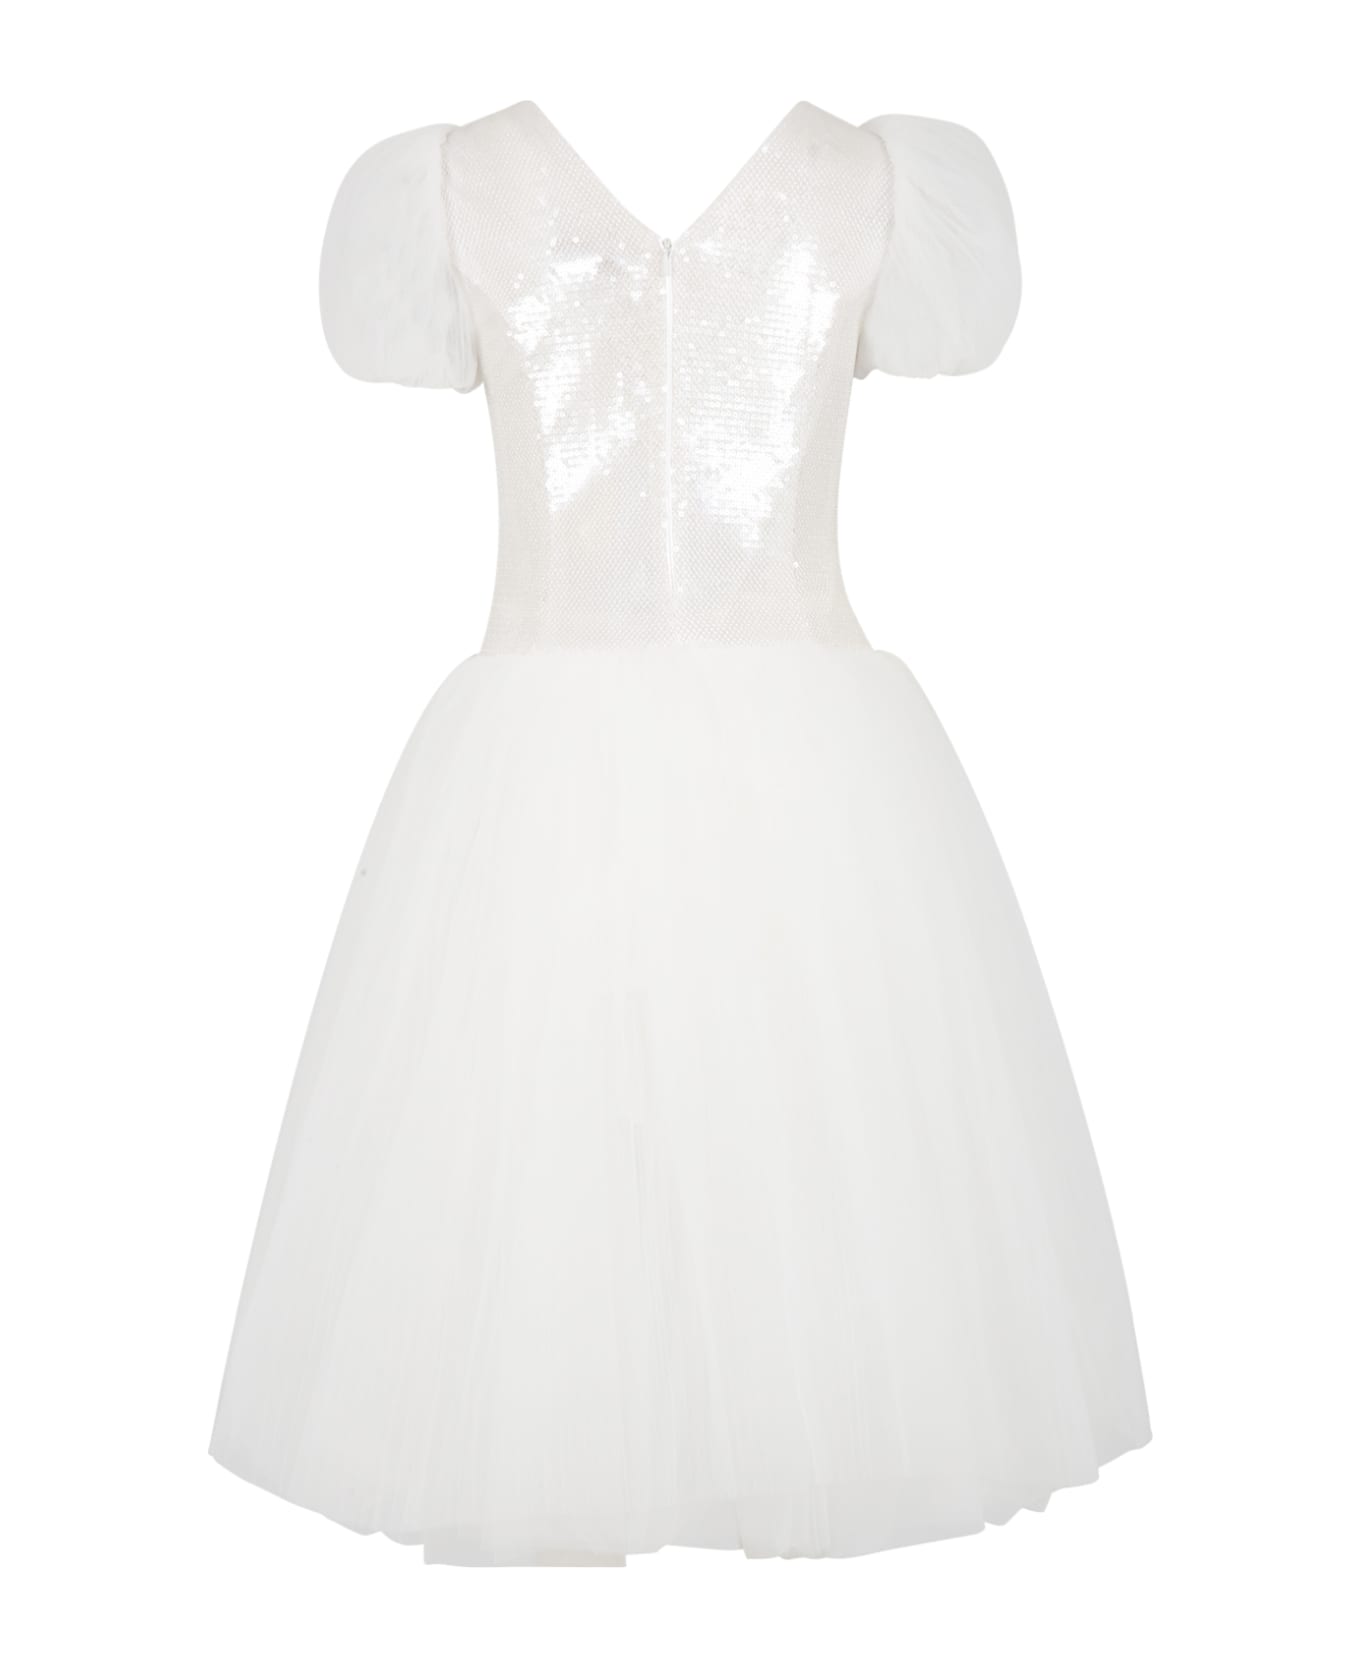 Monnalisa White Dress For Girl With Flowers - White